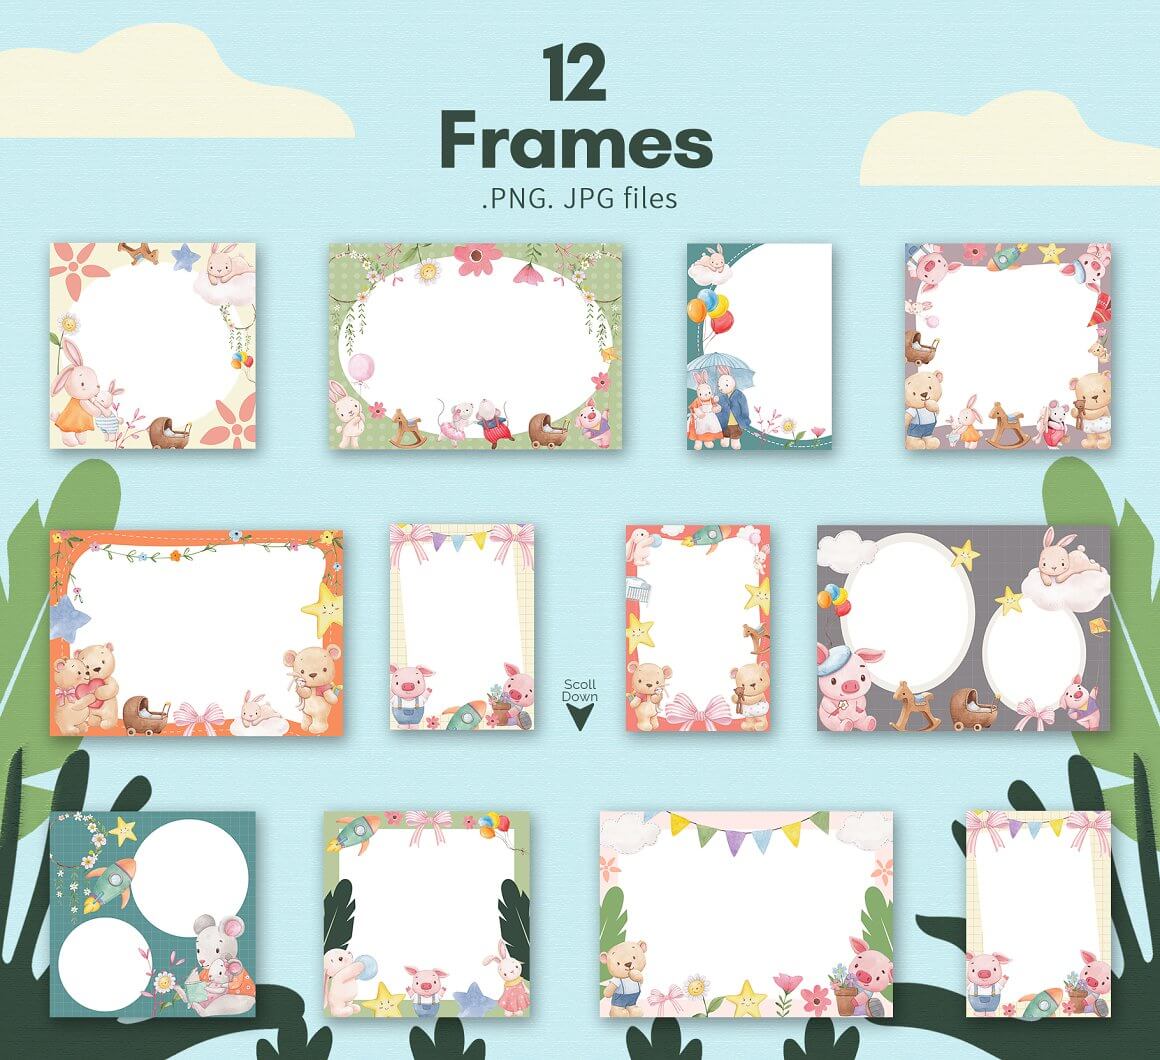 12 frames with children's design of small cute animals.